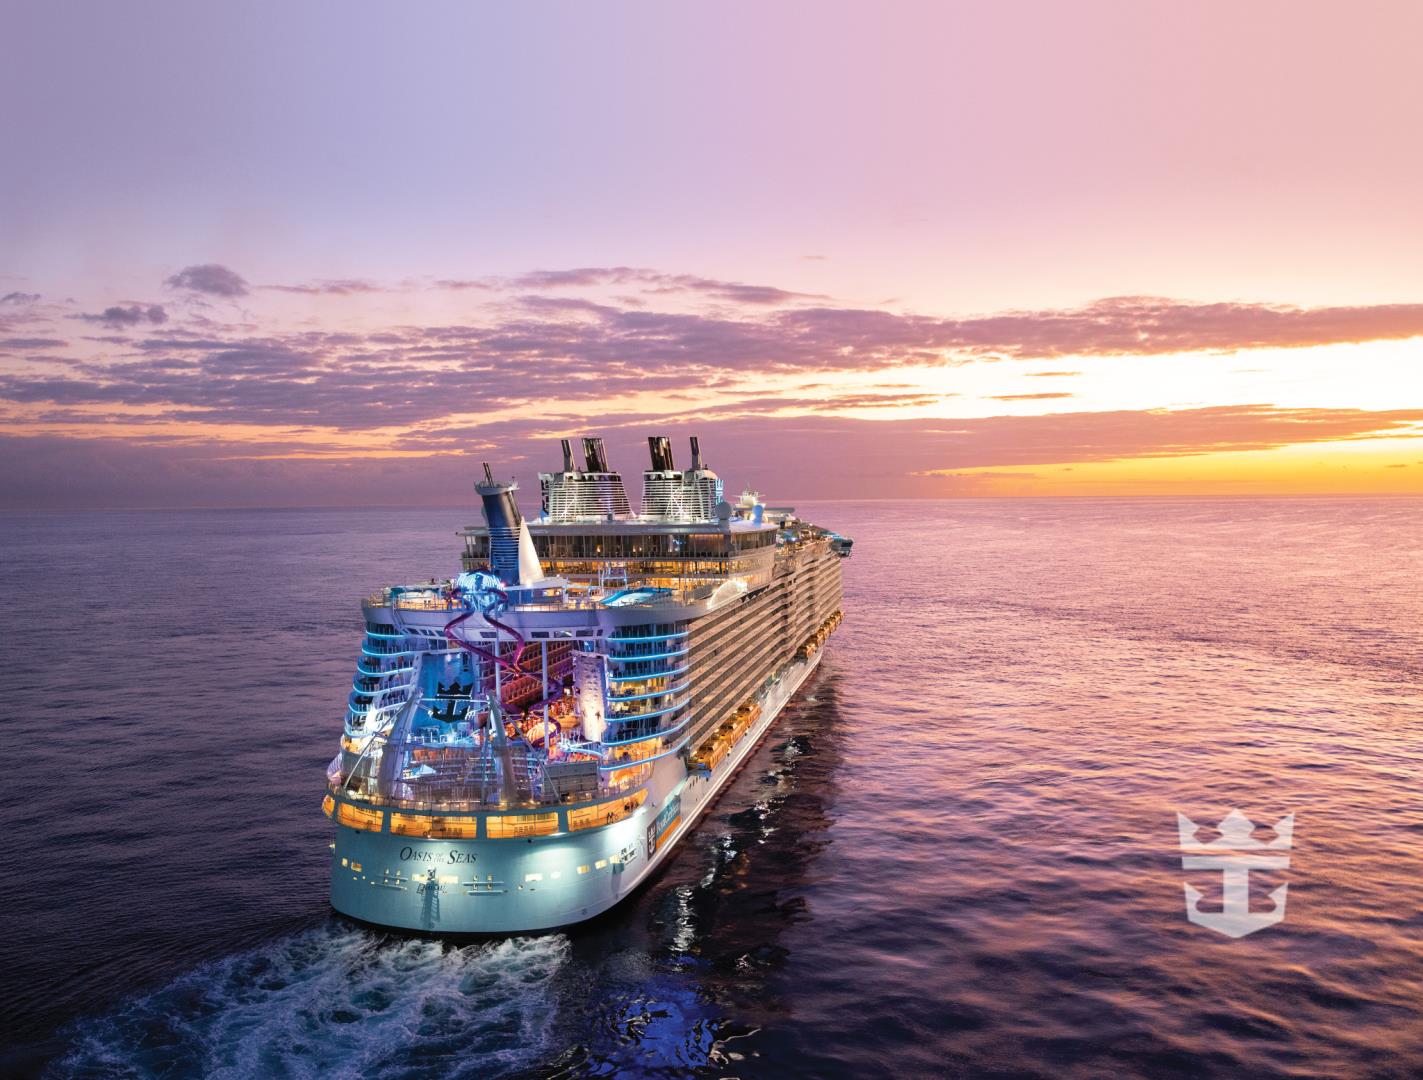 Rear view of Oasis of the Seas at sunset - Photo Credit: Michel Verdure